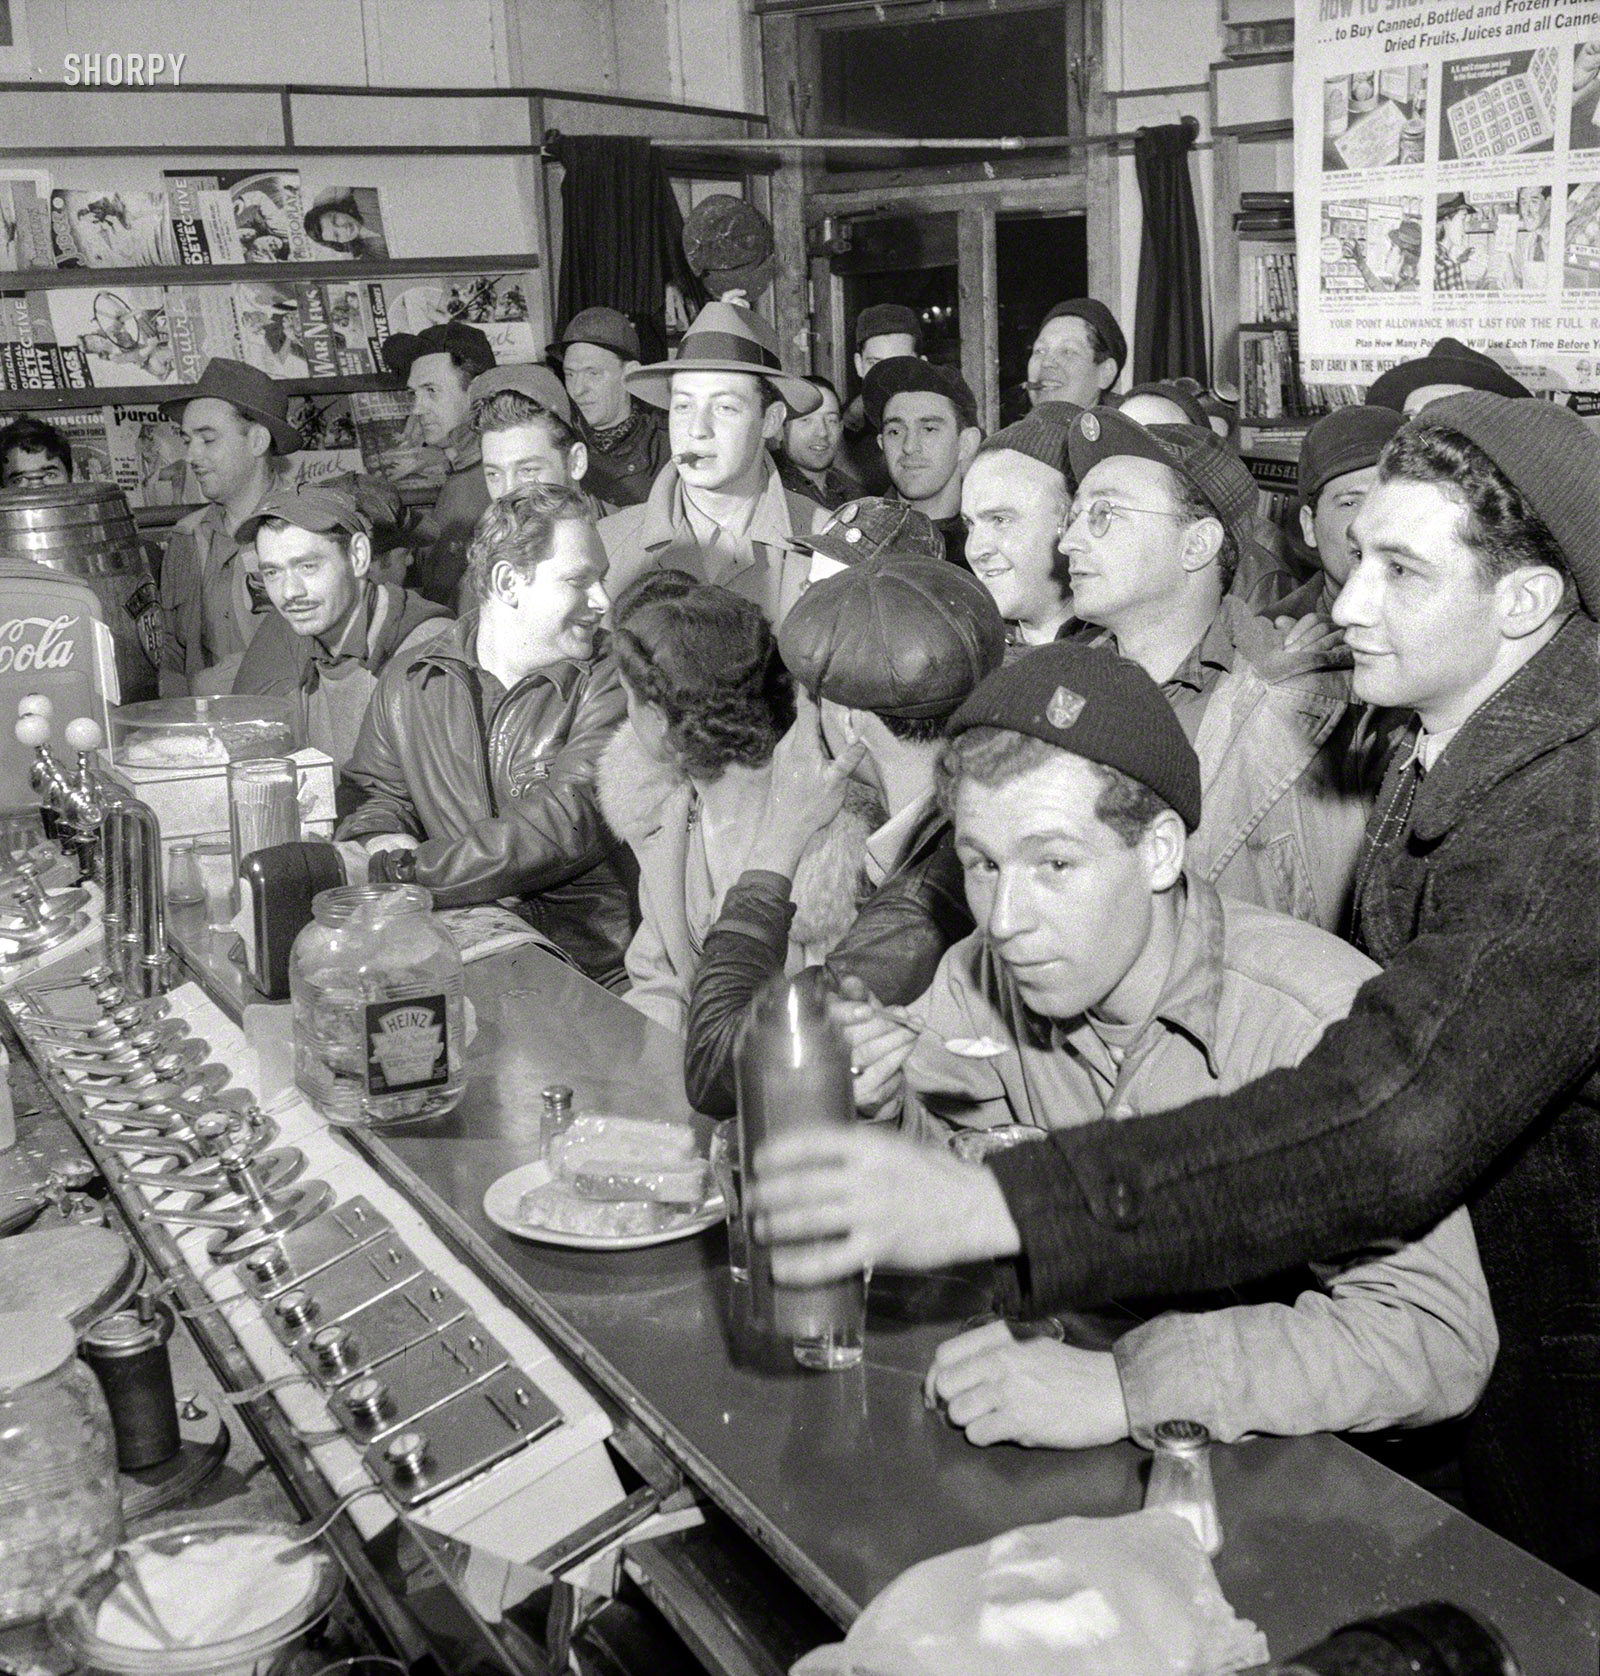 &nbsp; &nbsp; &nbsp; &nbsp; "We'll have what she's having."
April 1943. "Baltimore, Maryland. Third-shift defense workers getting snack at drugstore on corner where their shared car will pick them up around midnight." Photo by Marjory Collins for the Office of War Information. View full size.